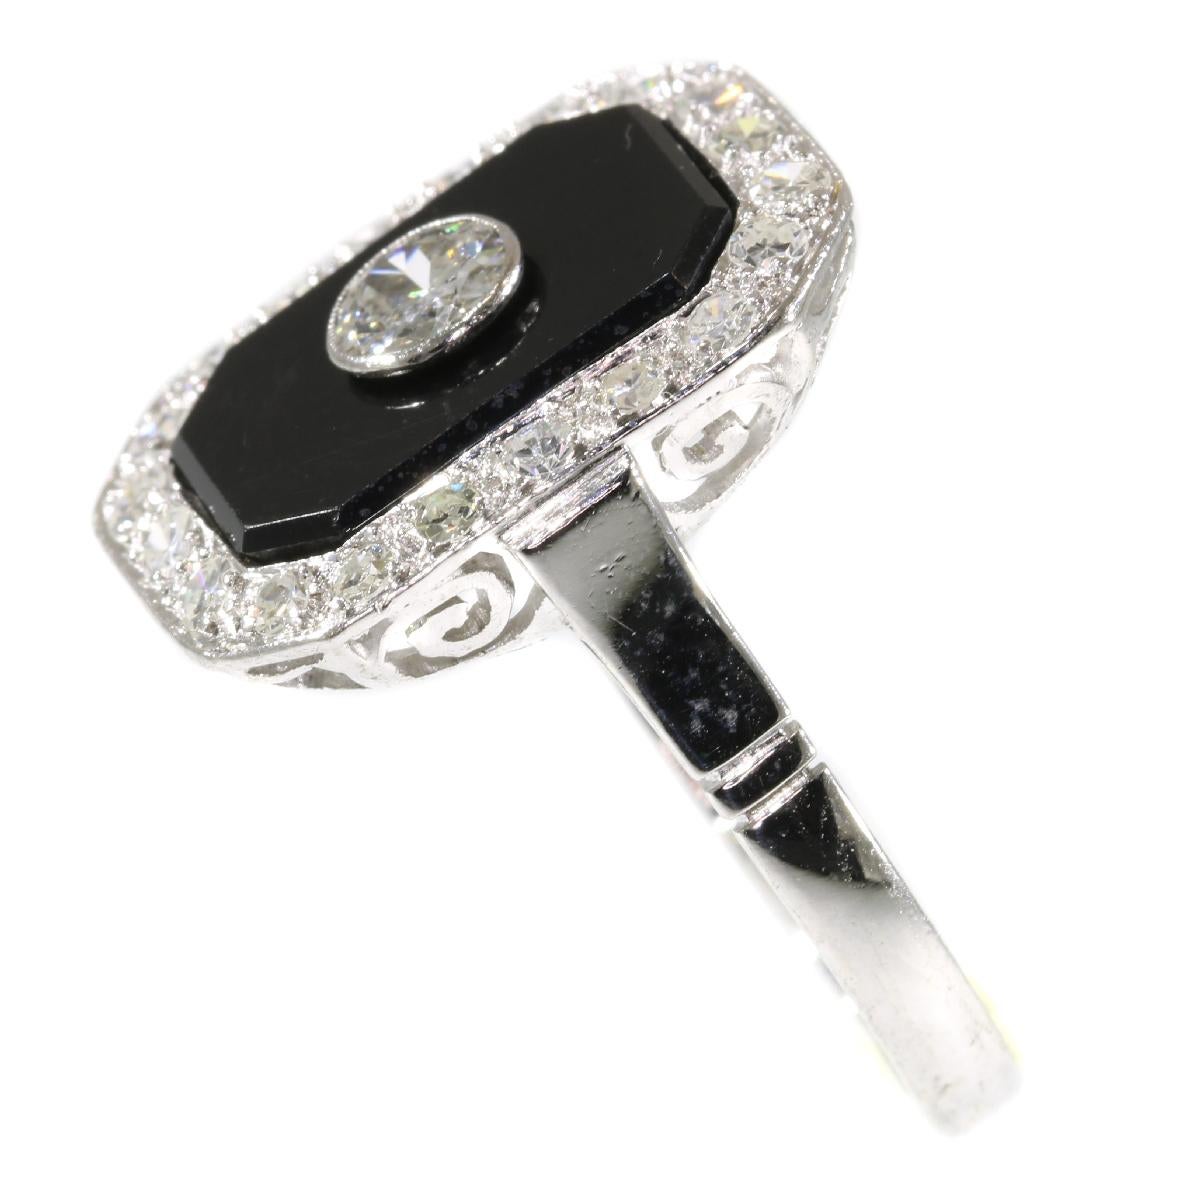 Vintage Platinum Art Deco Style Diamond and Onyx Ring from the 1950s im Zustand „Hervorragend“ in Antwerp, BE